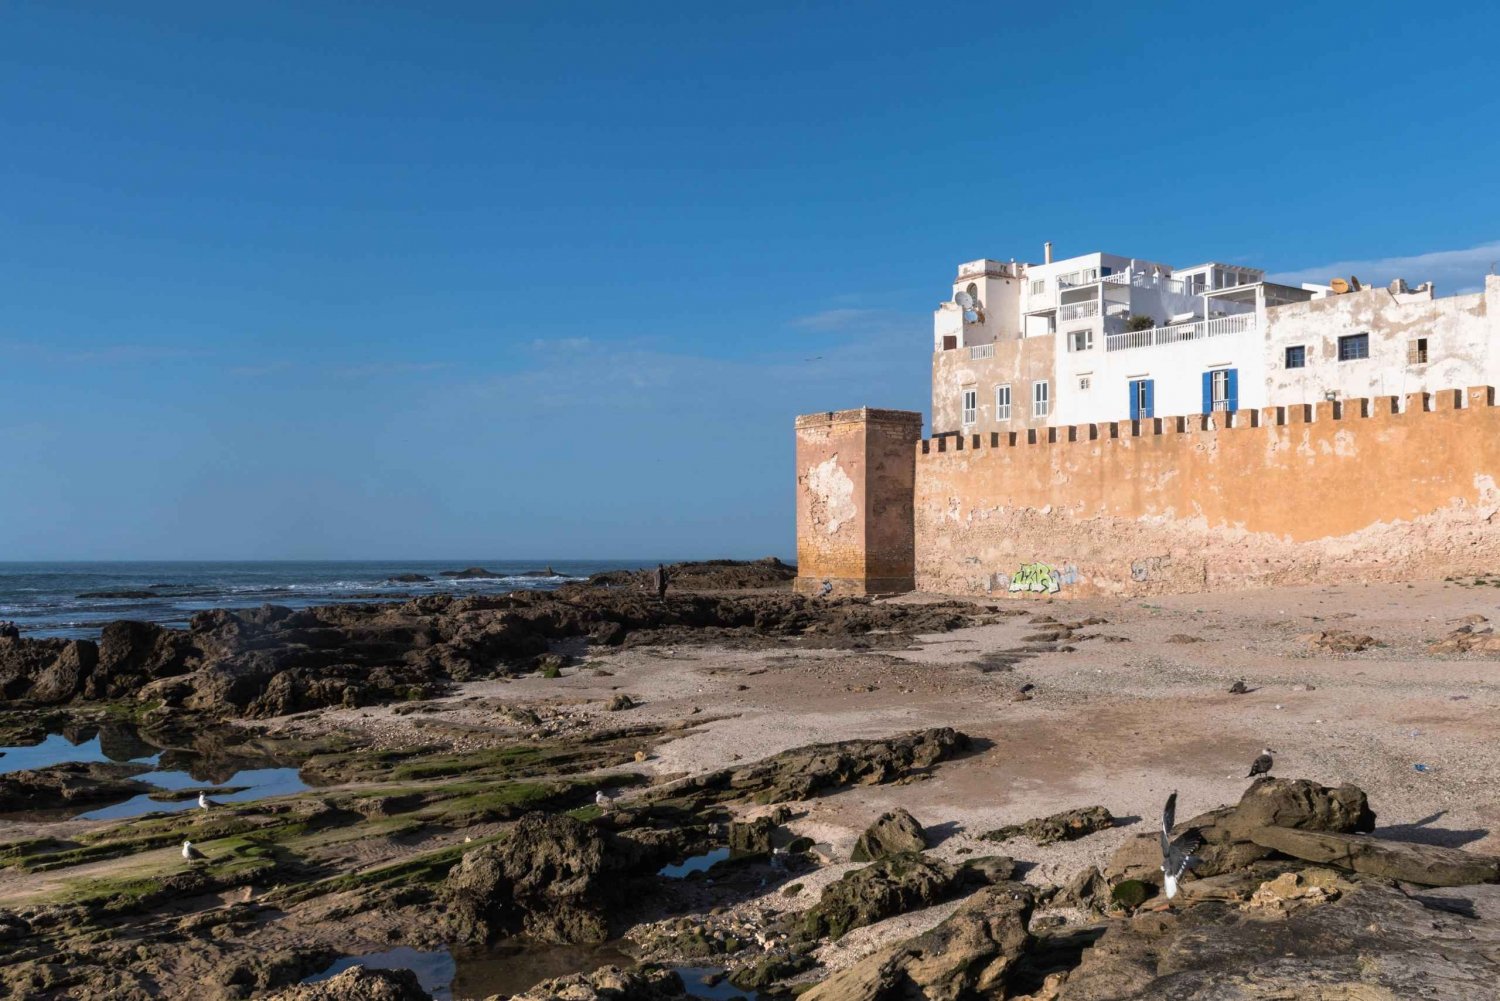 One day trip from Marrakesh to essaouira